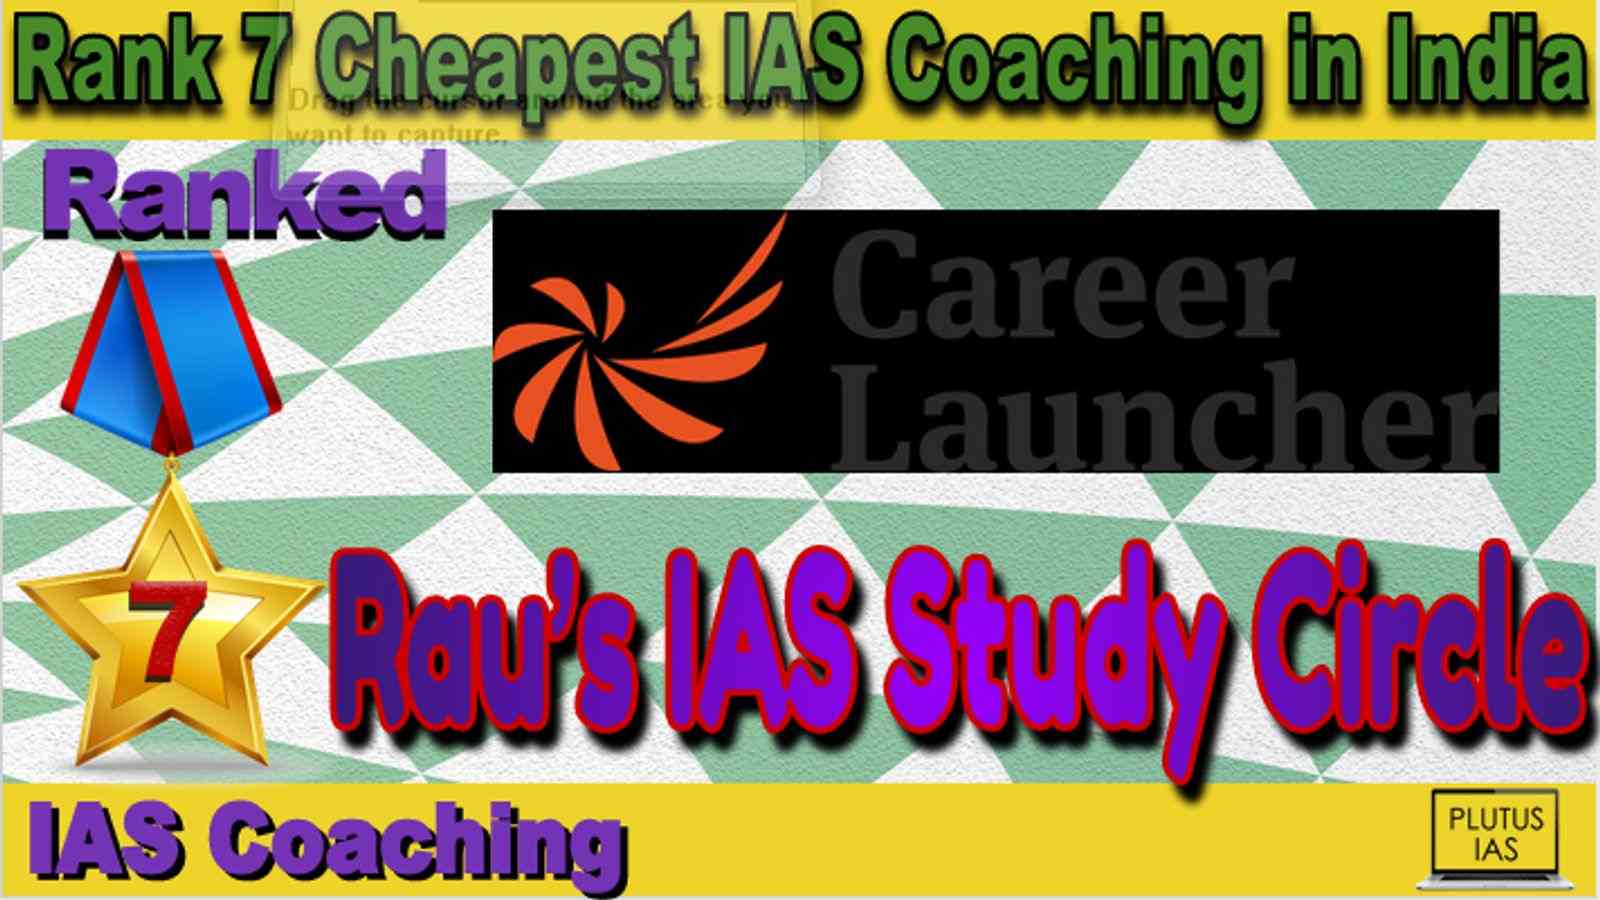 Rank 7 Cheapest IAS Coaching in India